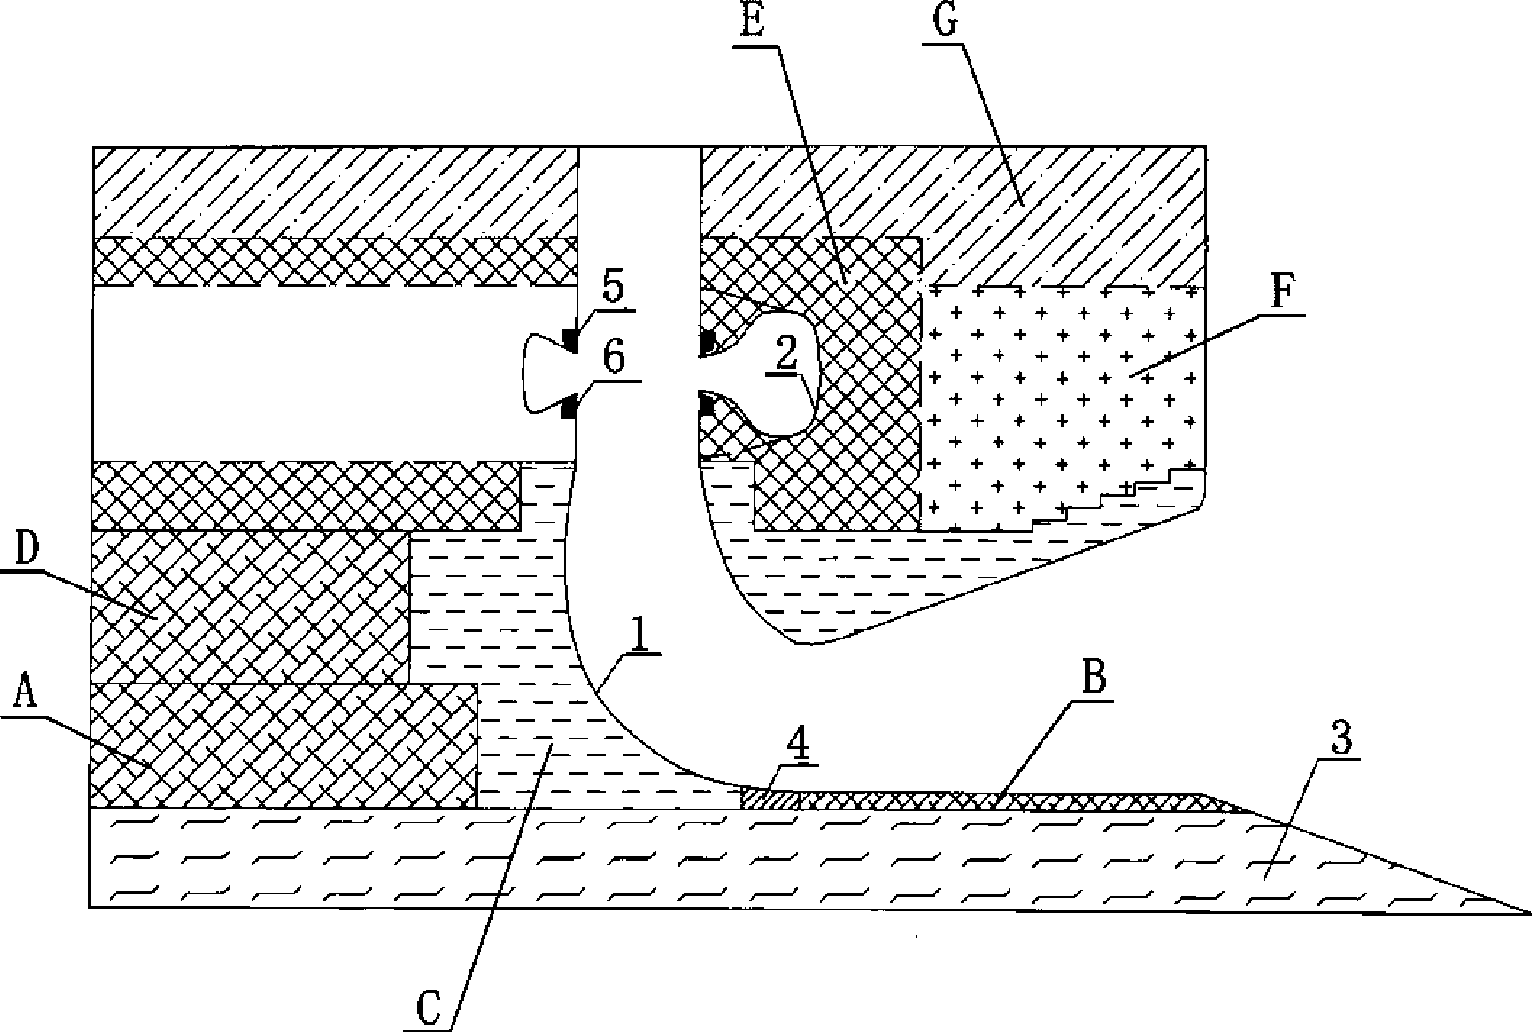 Construction method for large cast-in-situ steel reinforced concrete inlet channel and turbine housing